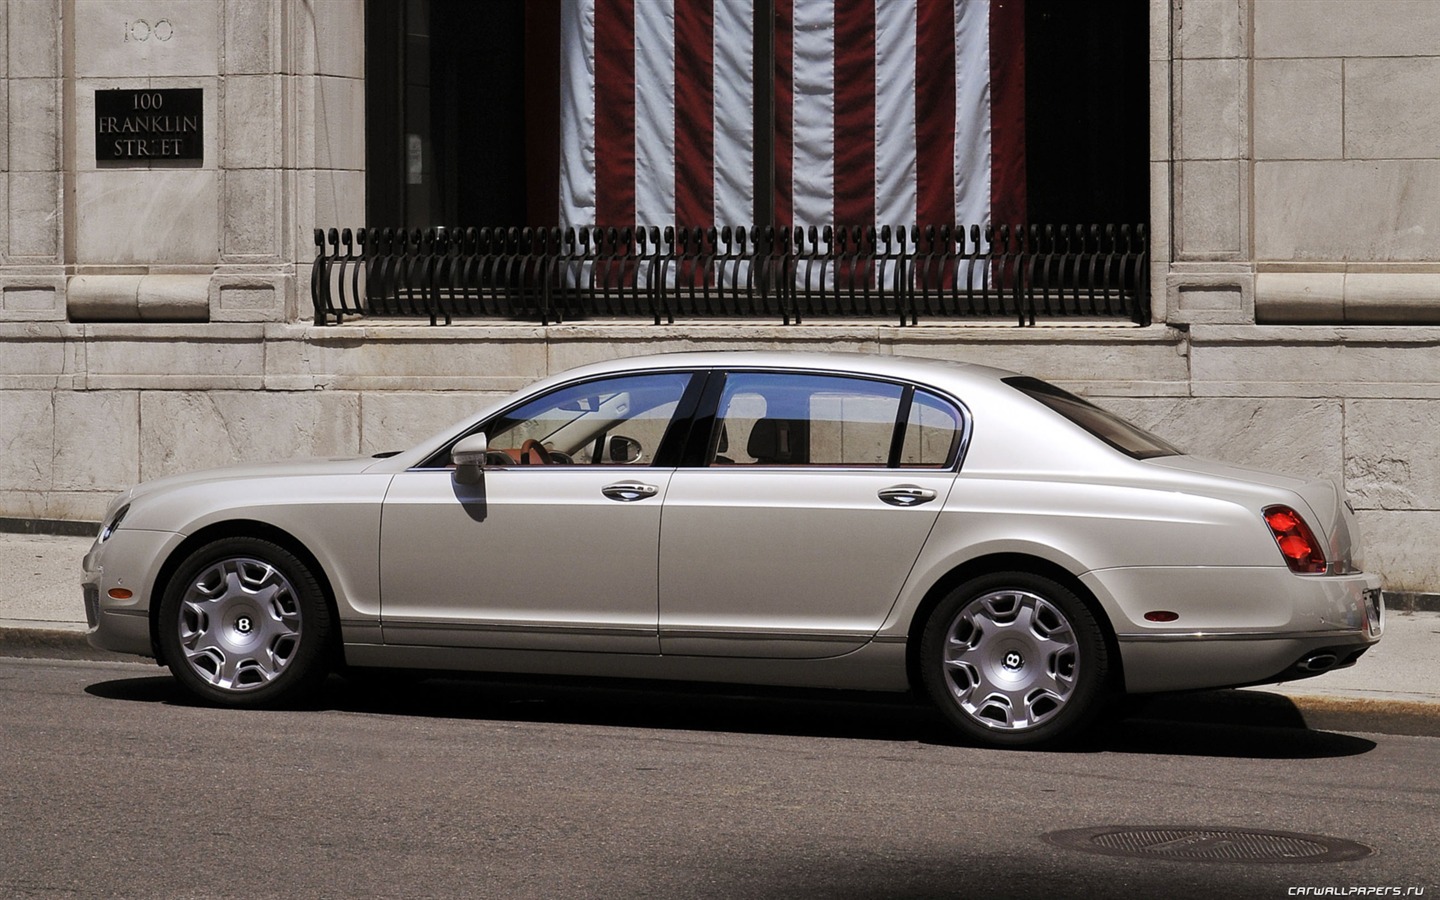 Bentley Continental Flying Spur - 2008 宾利12 - 1440x900